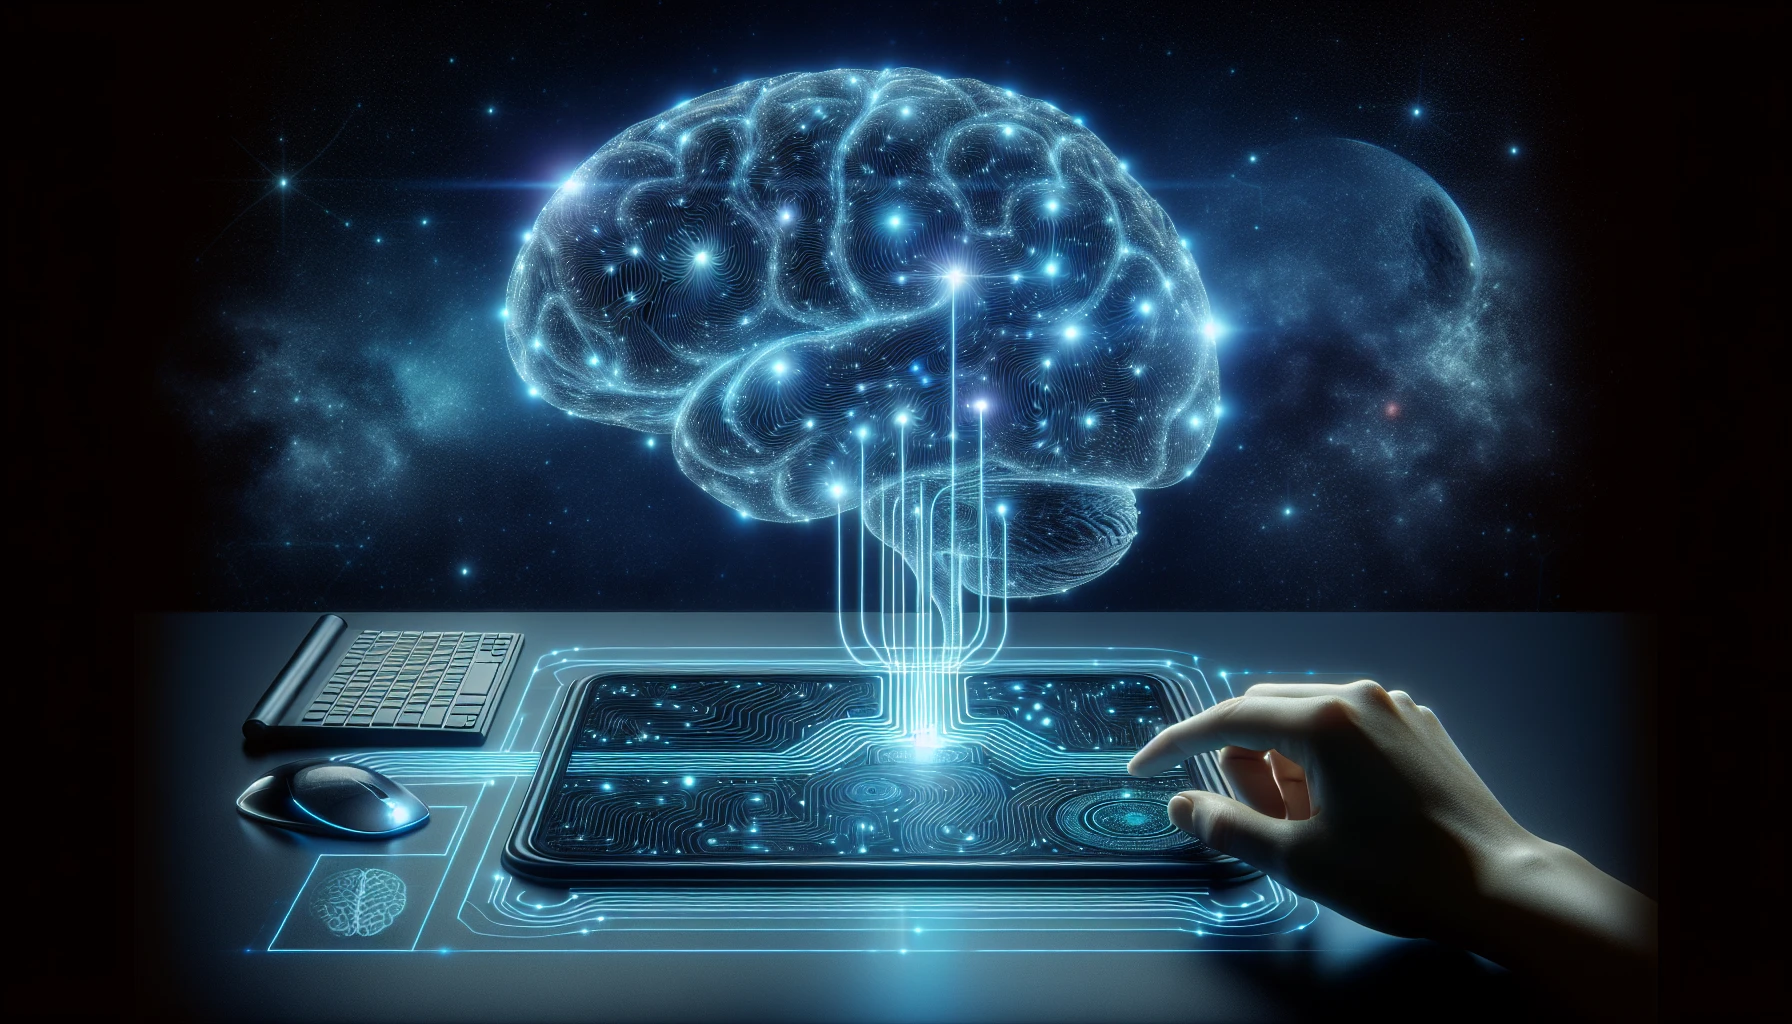 Illustration of a futuristic brain-computer interface for telepathy